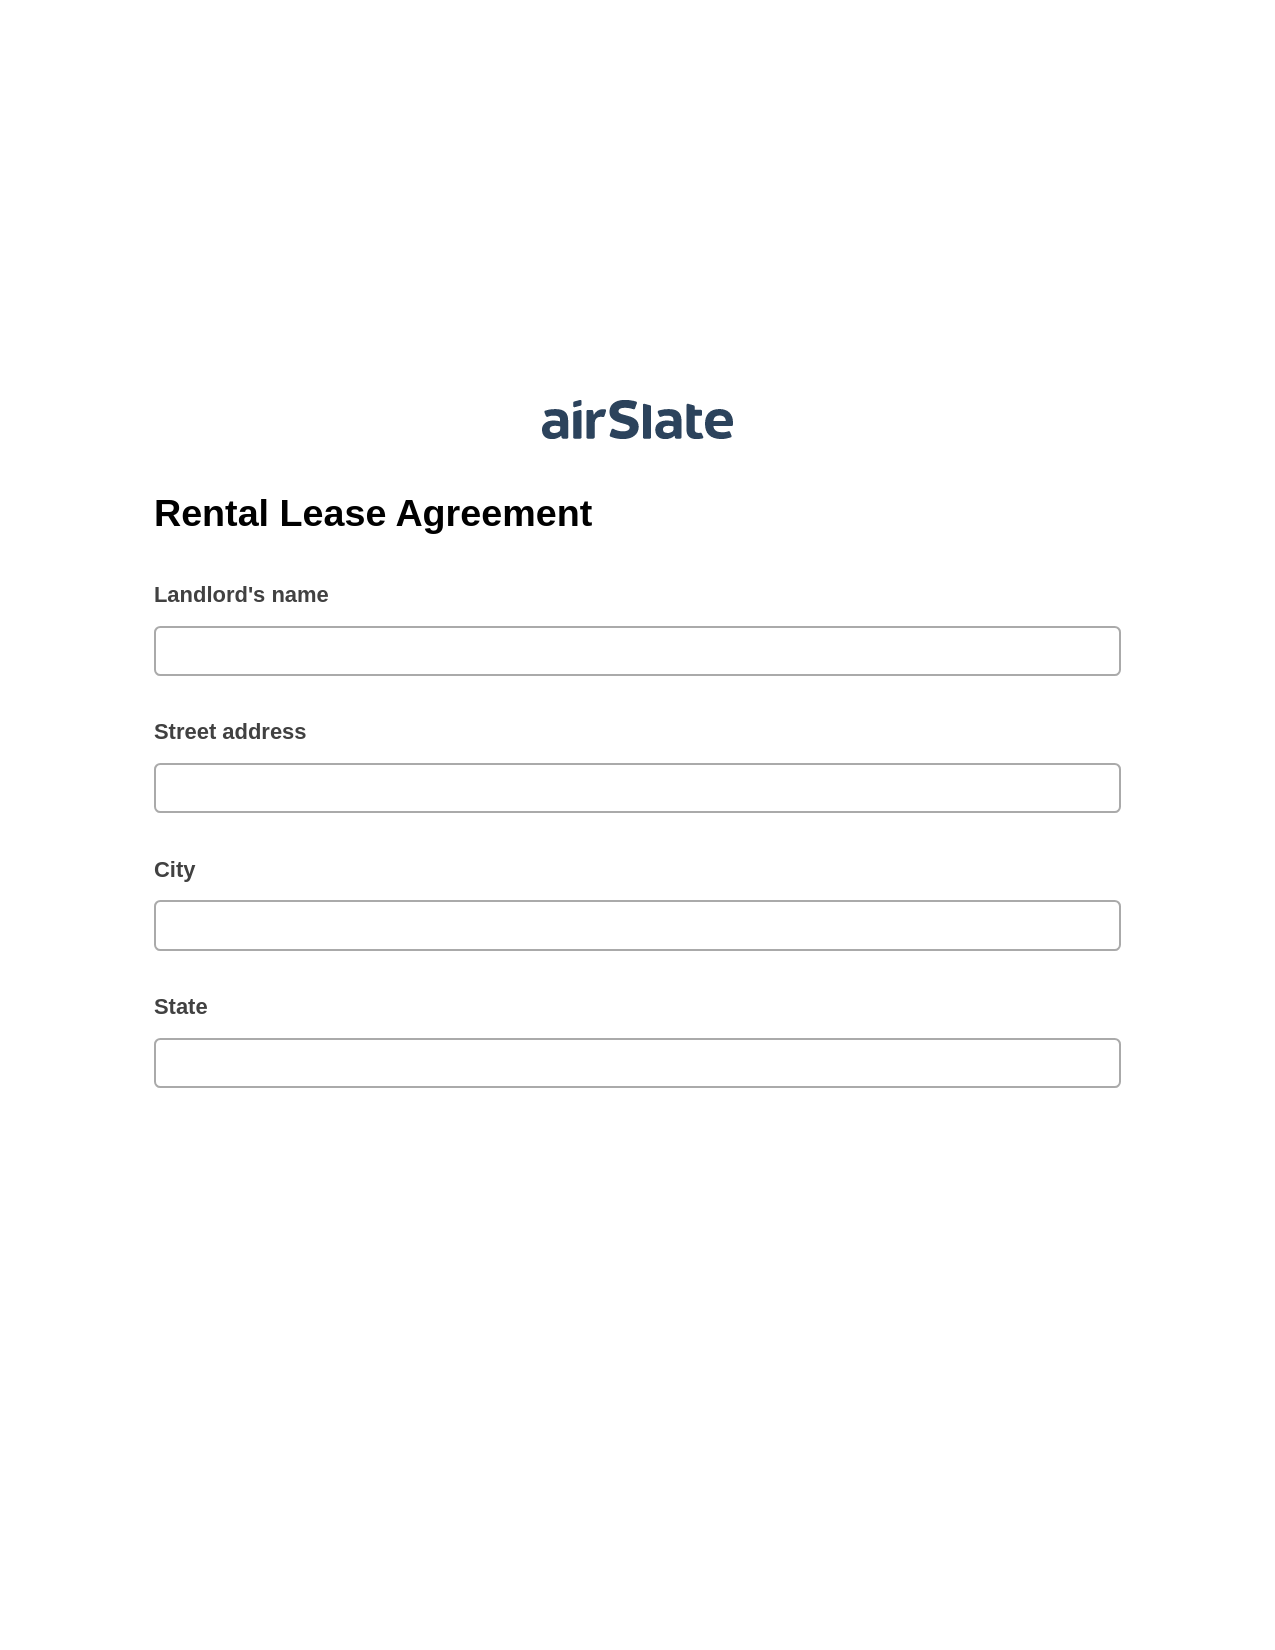 Rental Lease Agreement Pre-fill from Excel Spreadsheet Dropdown Options Bot, Invoke Salesforce Process Bot, Export to Salesforce Bot